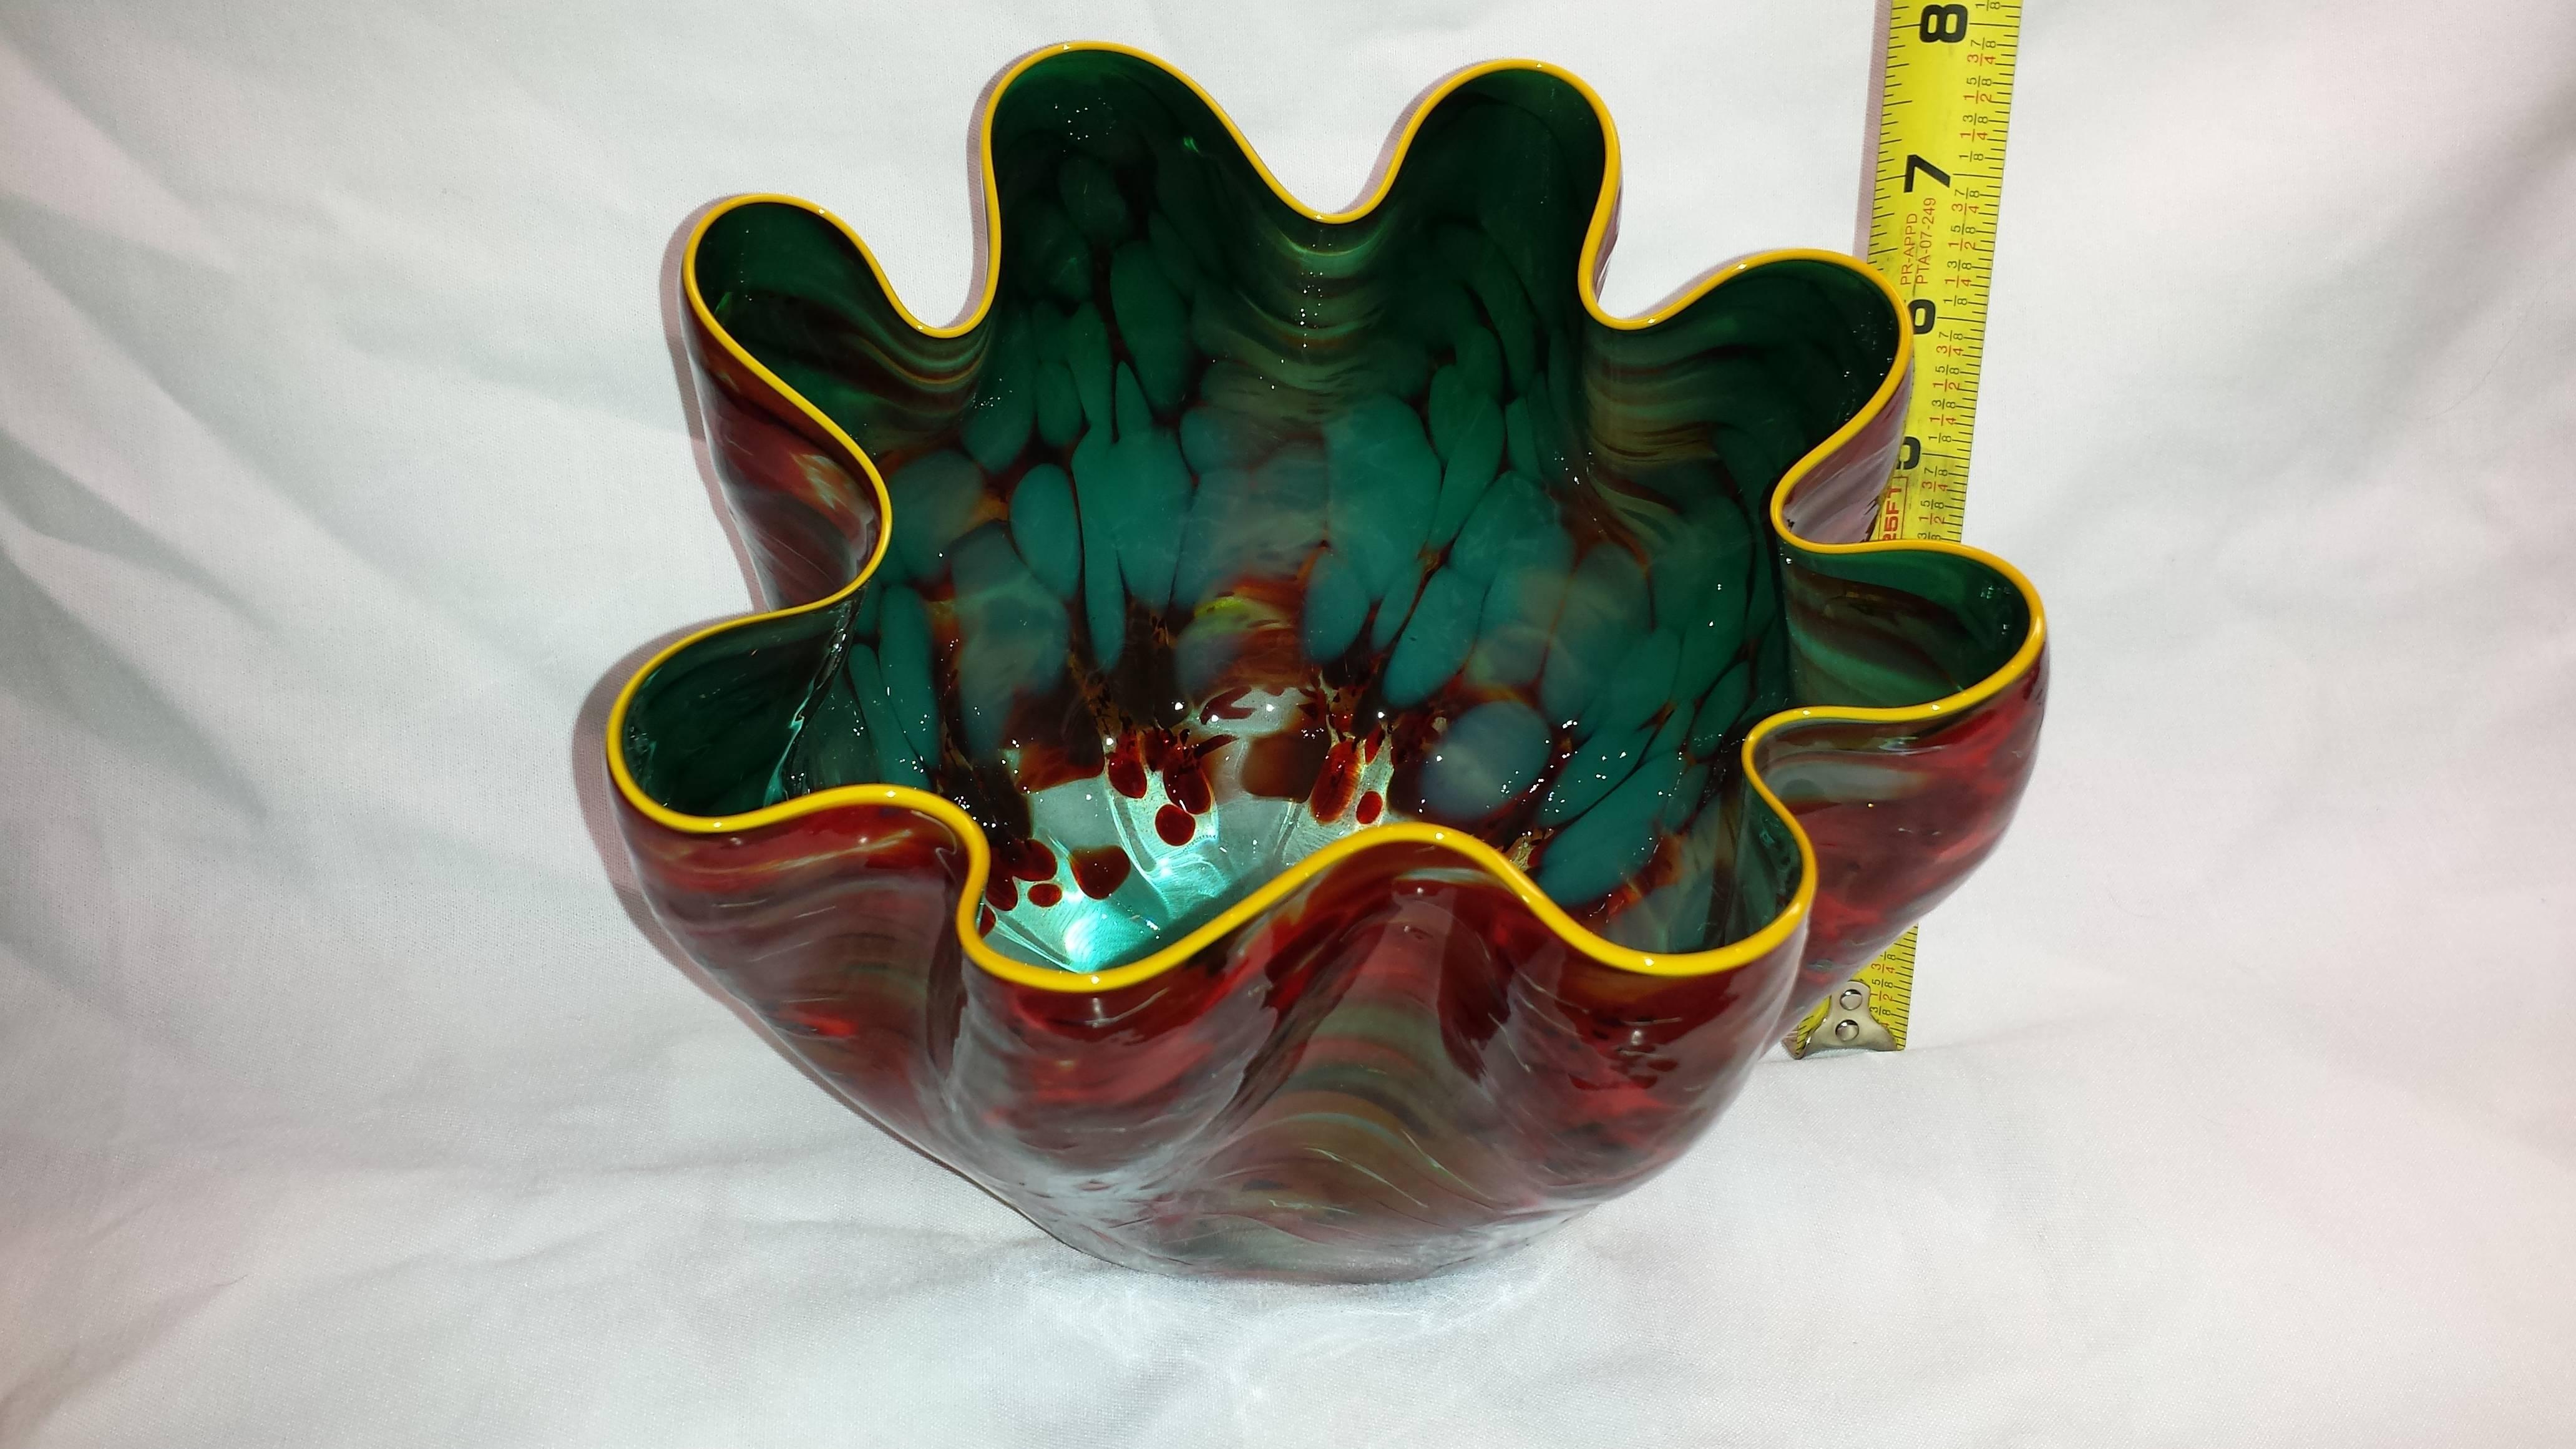 Contemporary Dale Chihuly, Firefly Macchia for Portland Press, Studio Edition, 2008, Signed